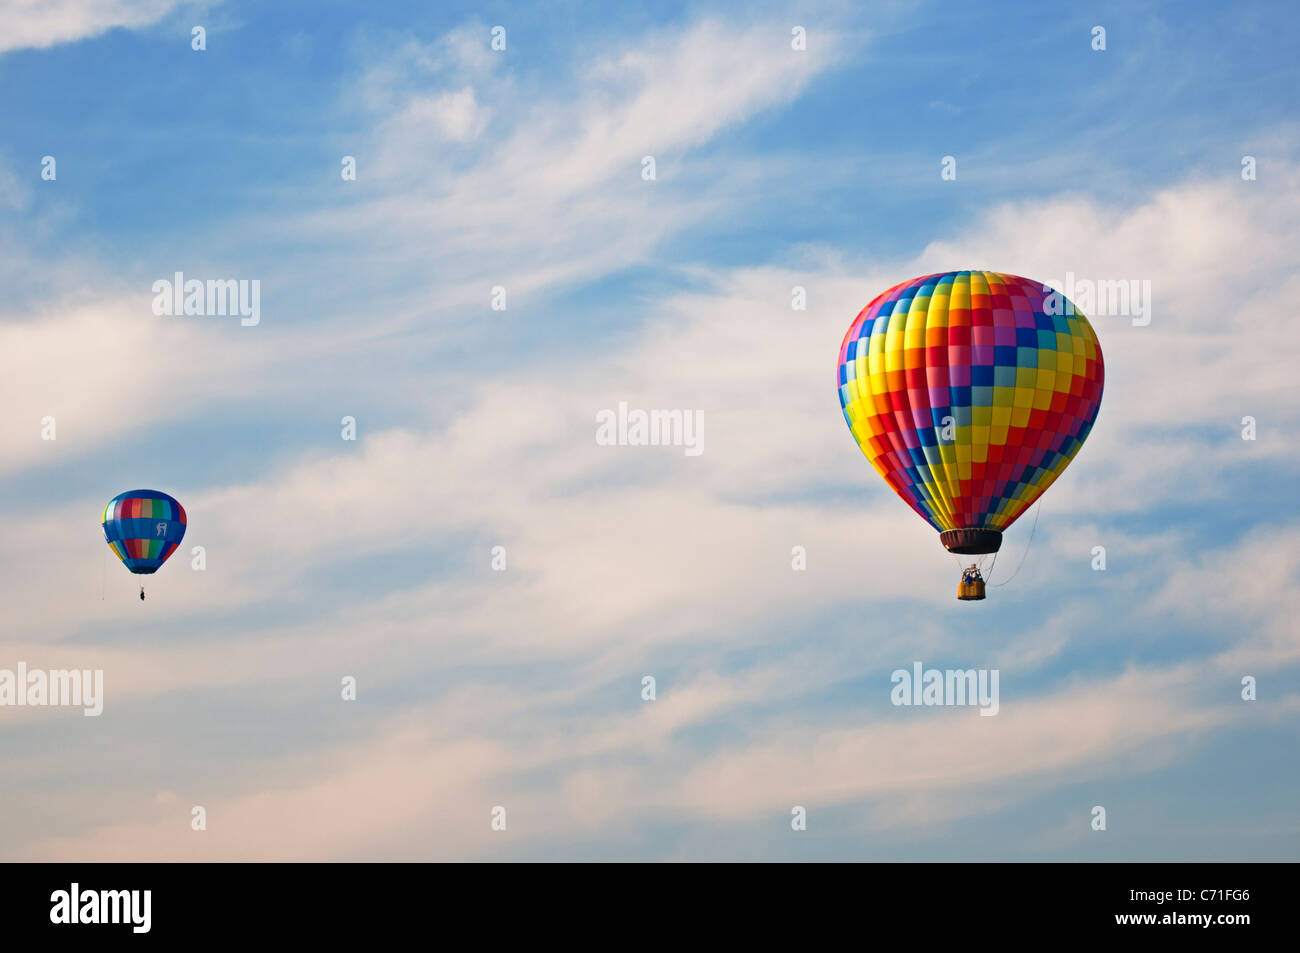 A hot air balloon festival in Bealeton, Virginia / Two hot air balloons flying with a hazy blue sky background Stock Photo